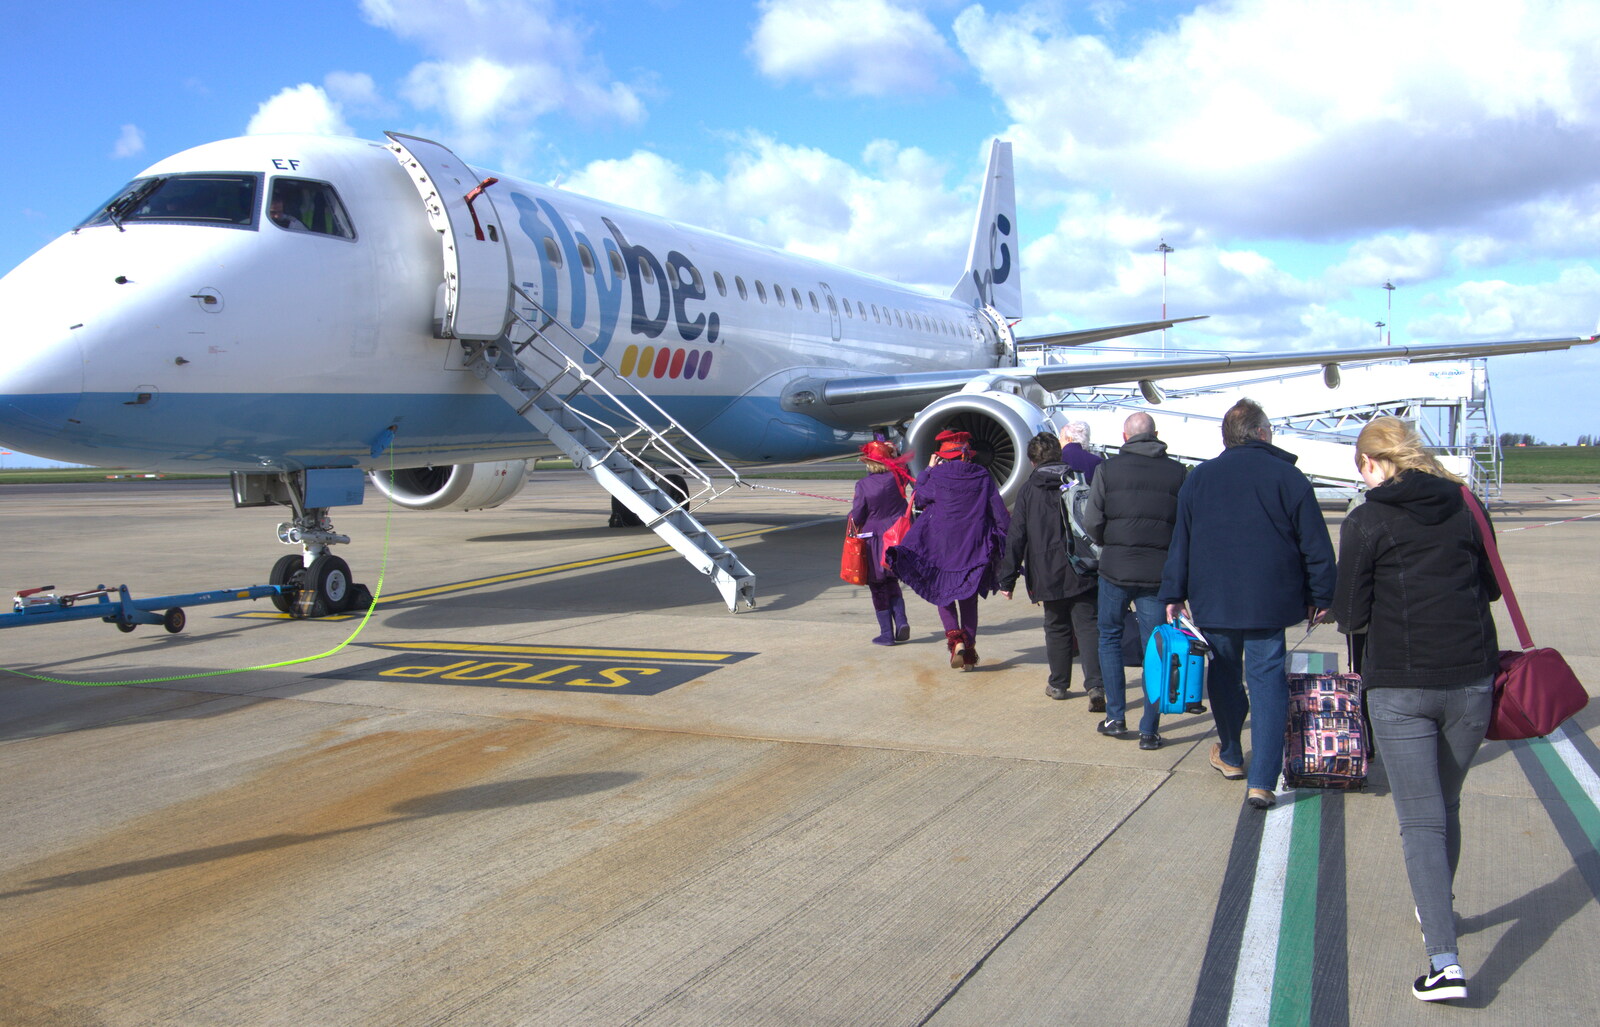 Embarcation on an Embraer from Devon In A Day, Exeter, Devon - 14th March 2019